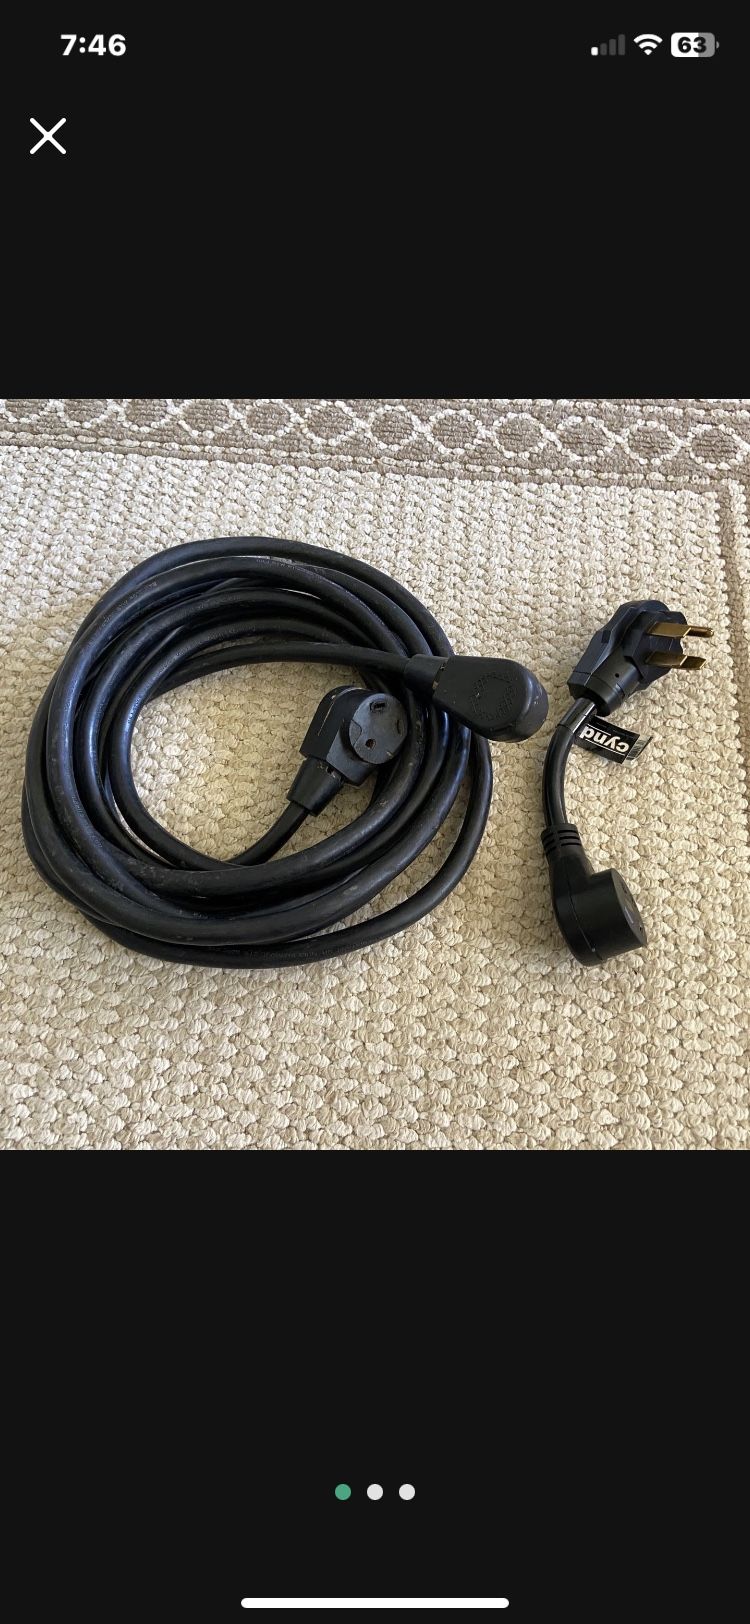 30 Amp RV Motorhome Electric Cord and 30/50 pigtail adapter